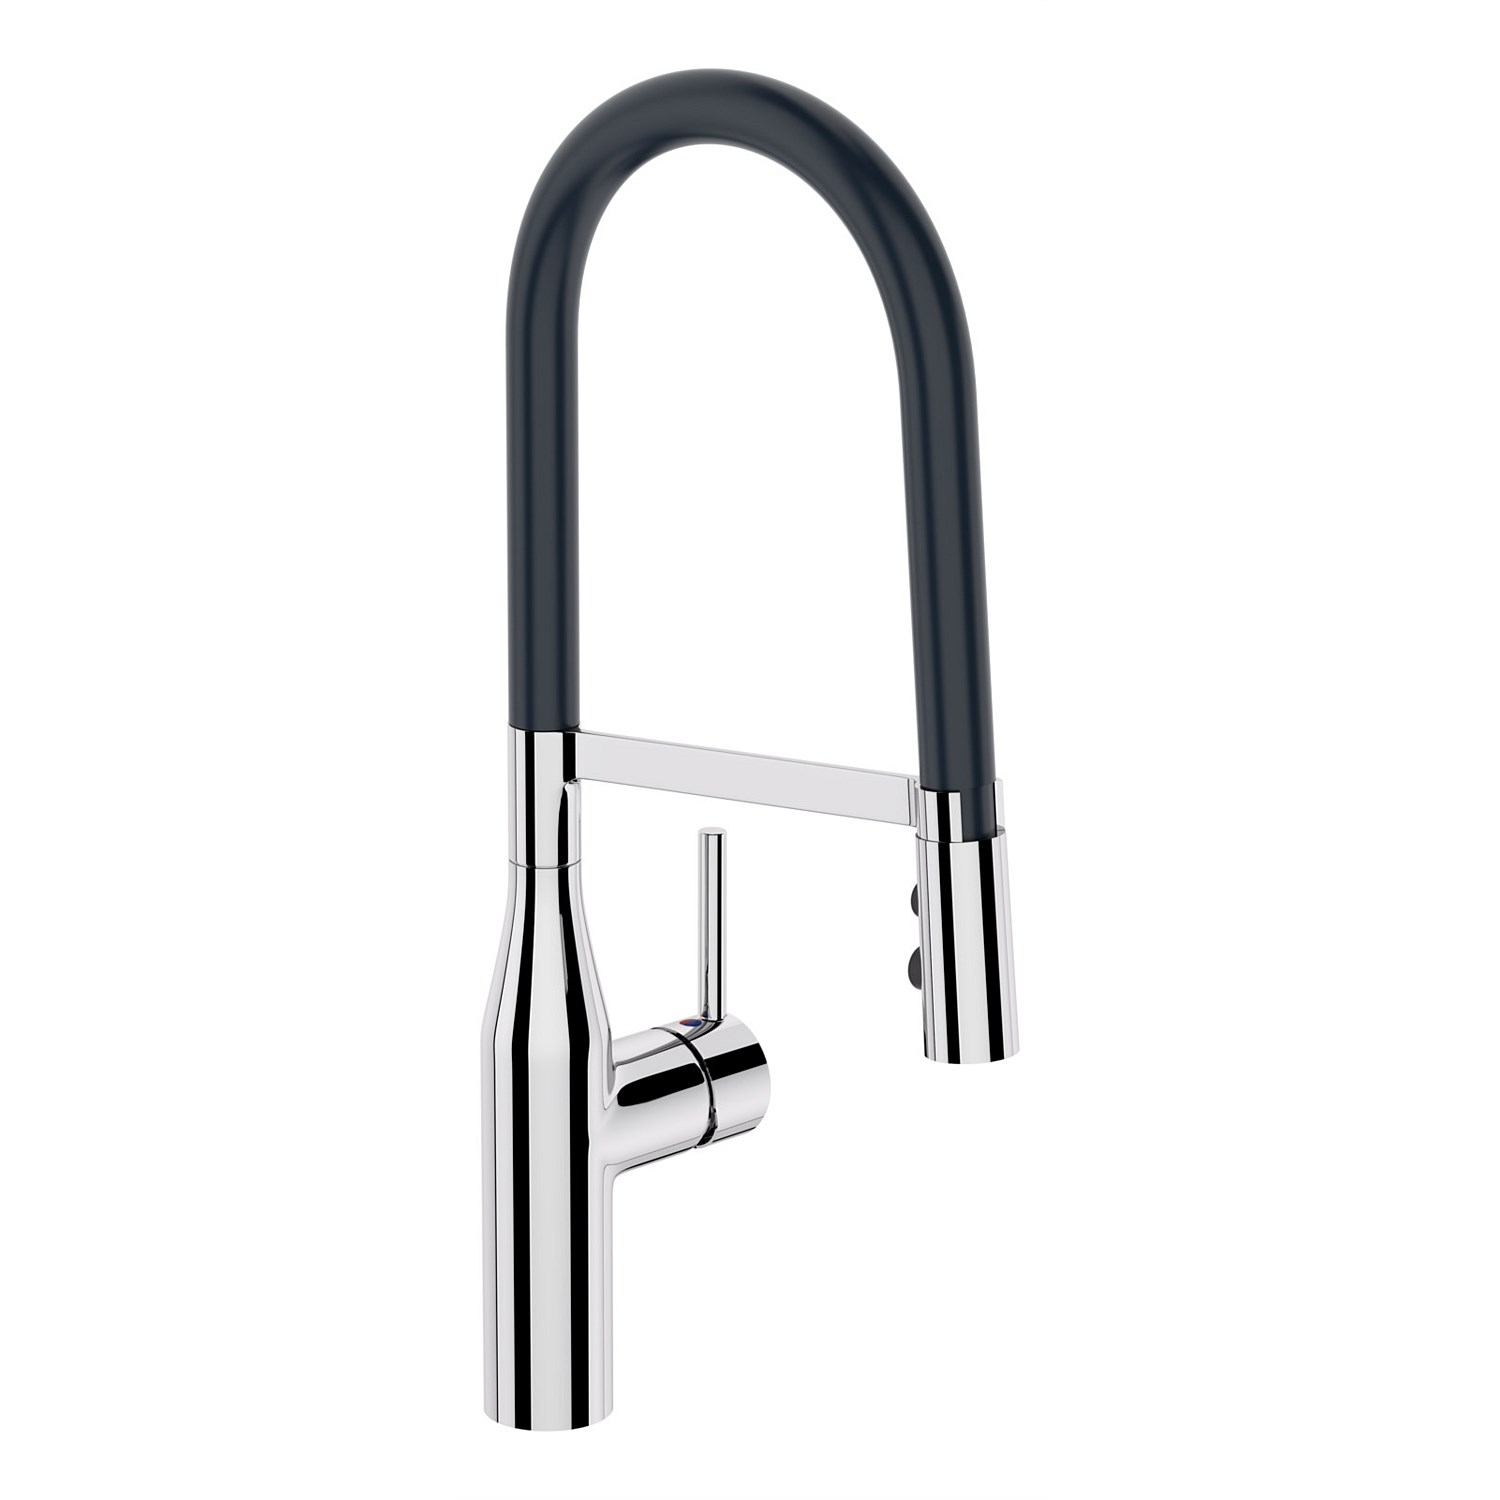 Kitchen Taps Sink Mixers Plumbing World Elementi Uno Goose Neck Sink Mixer With Rubber Pull Out Spout